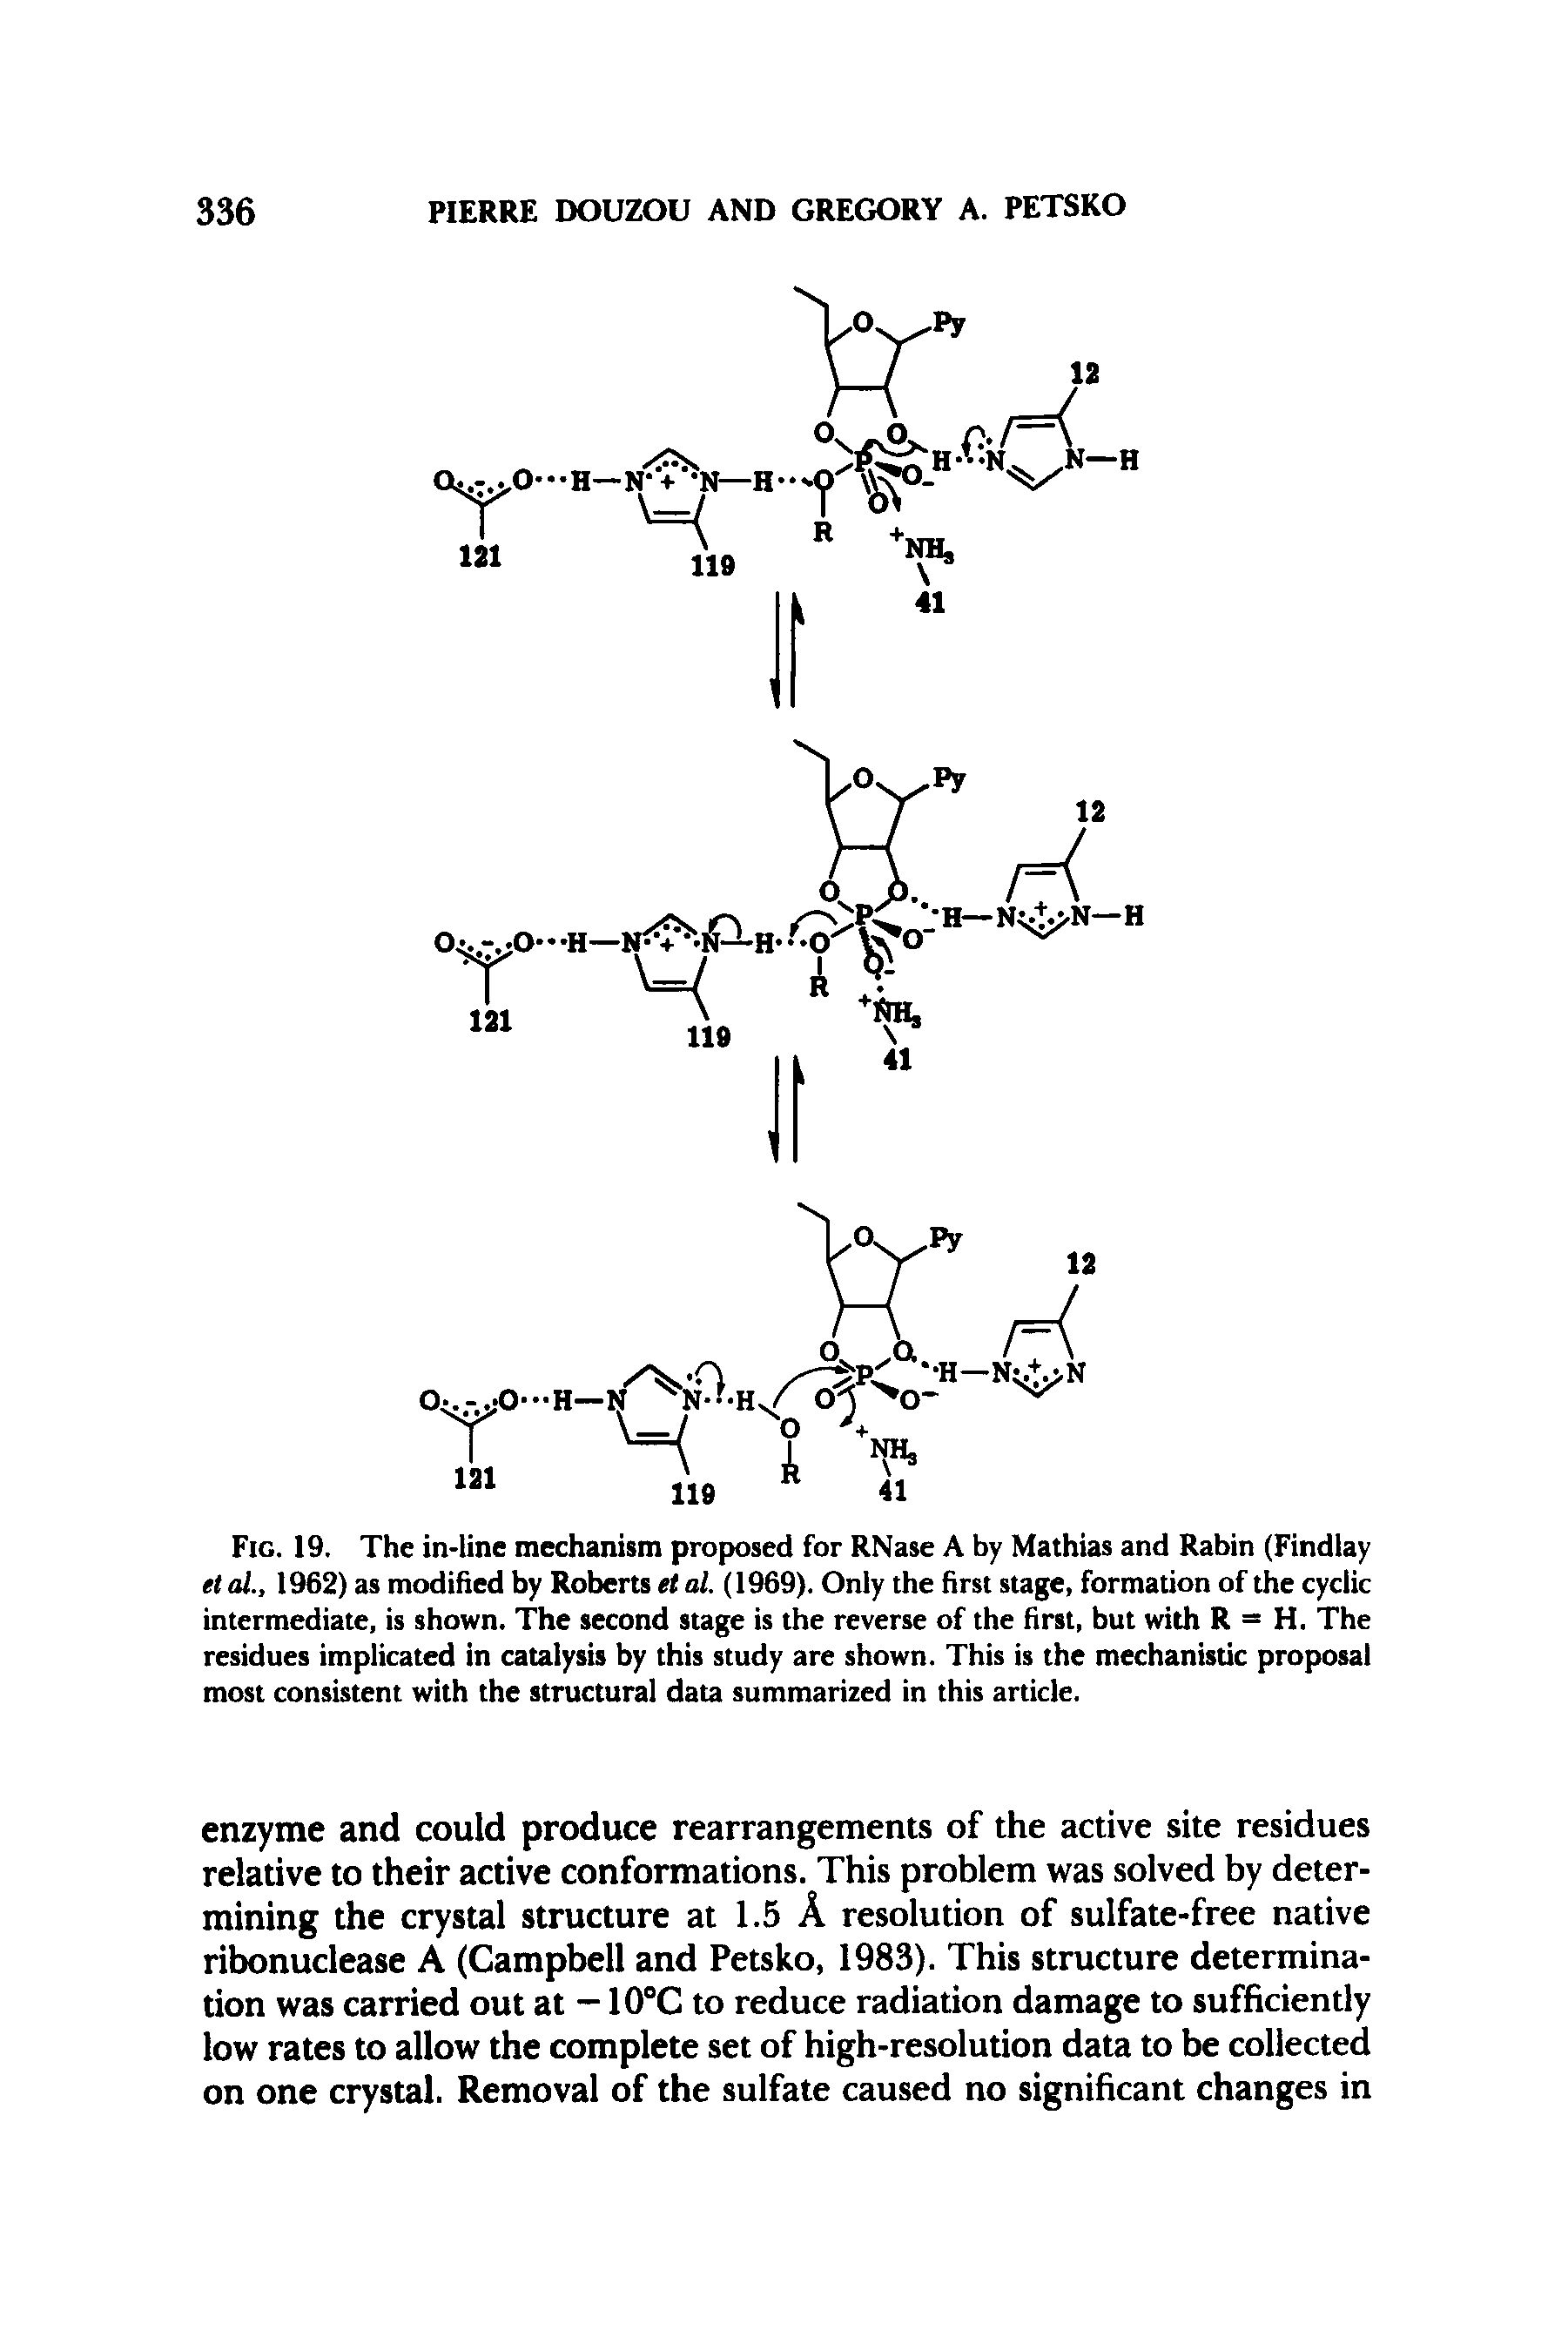 Fig. 19. The in-line mechanism propiosed for RNase A by Mathias and Rabin (Findlay etd 1962) as modified by Roberts et al. (1969). Only the first stage, formation of the cyclic intermediate, is shown. The second stage is the reverse of the first, but with R = H. The residues implicated in catalysis by this study are shown. This is the mechanistic proposal most consistent with the structural data summarized in this article.